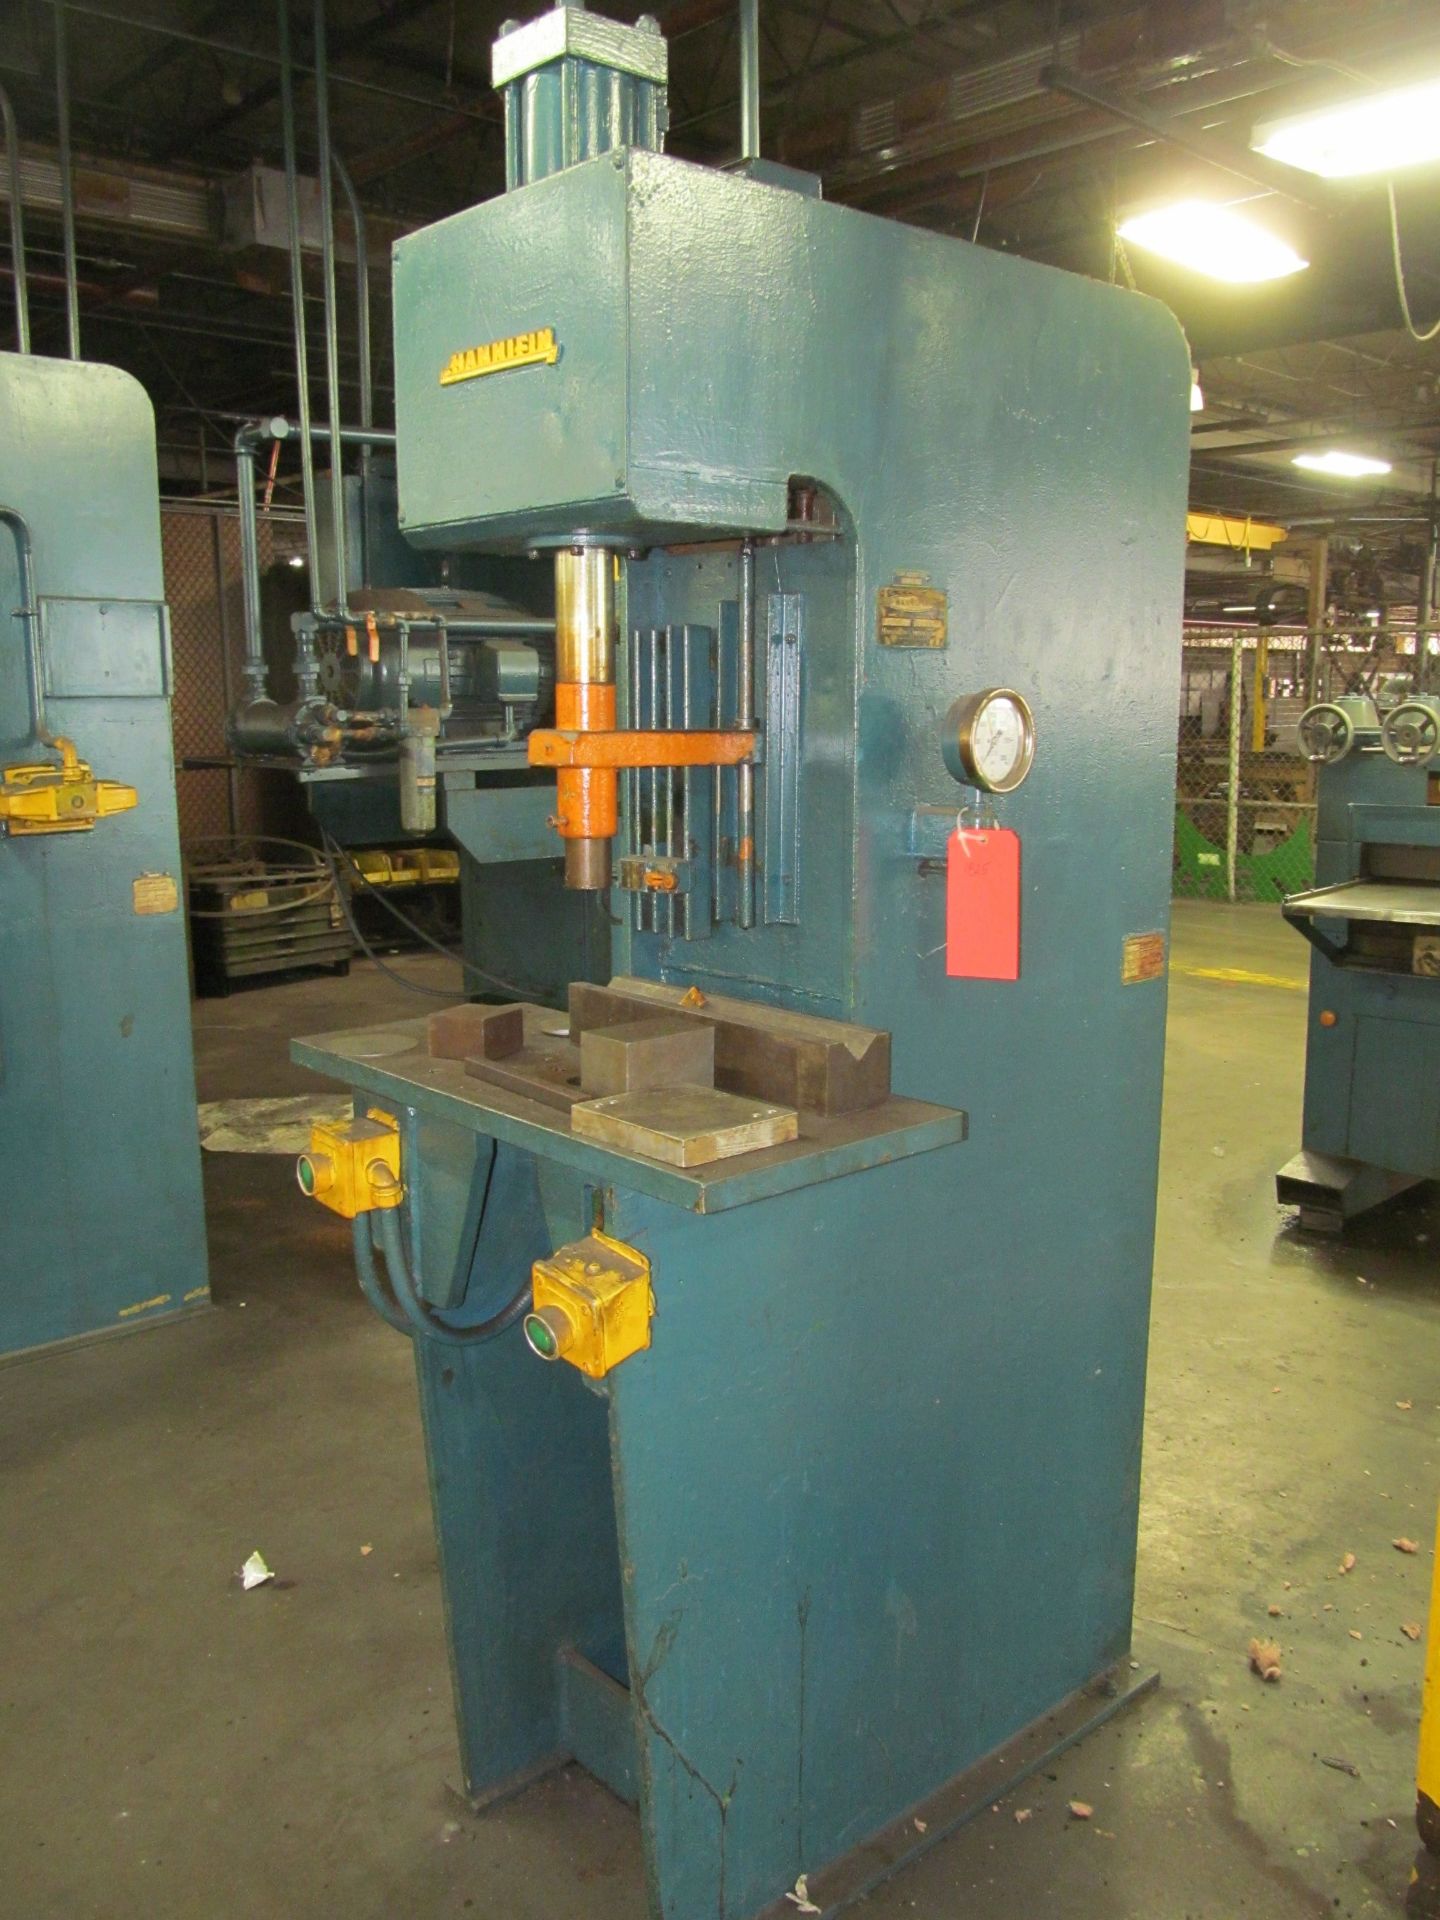 Hannifin 8-Ton Cap. Model F 21-41-M Hydraulic Press, S/N: E 37373-4; Rated at 3,000-PSI, Palm